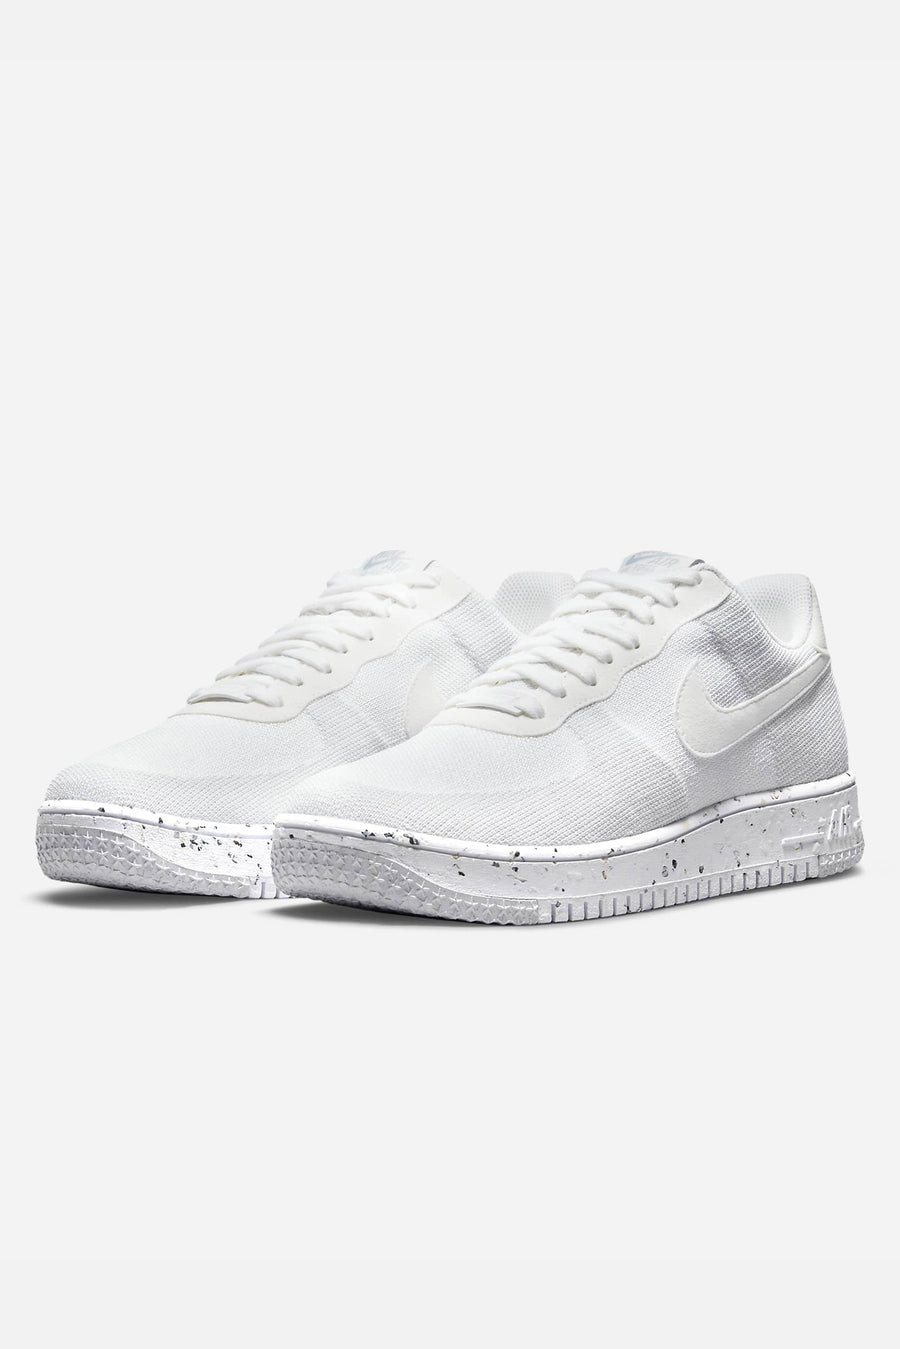 Nike Air Force 1 Crater Flyknit White - blueandcream